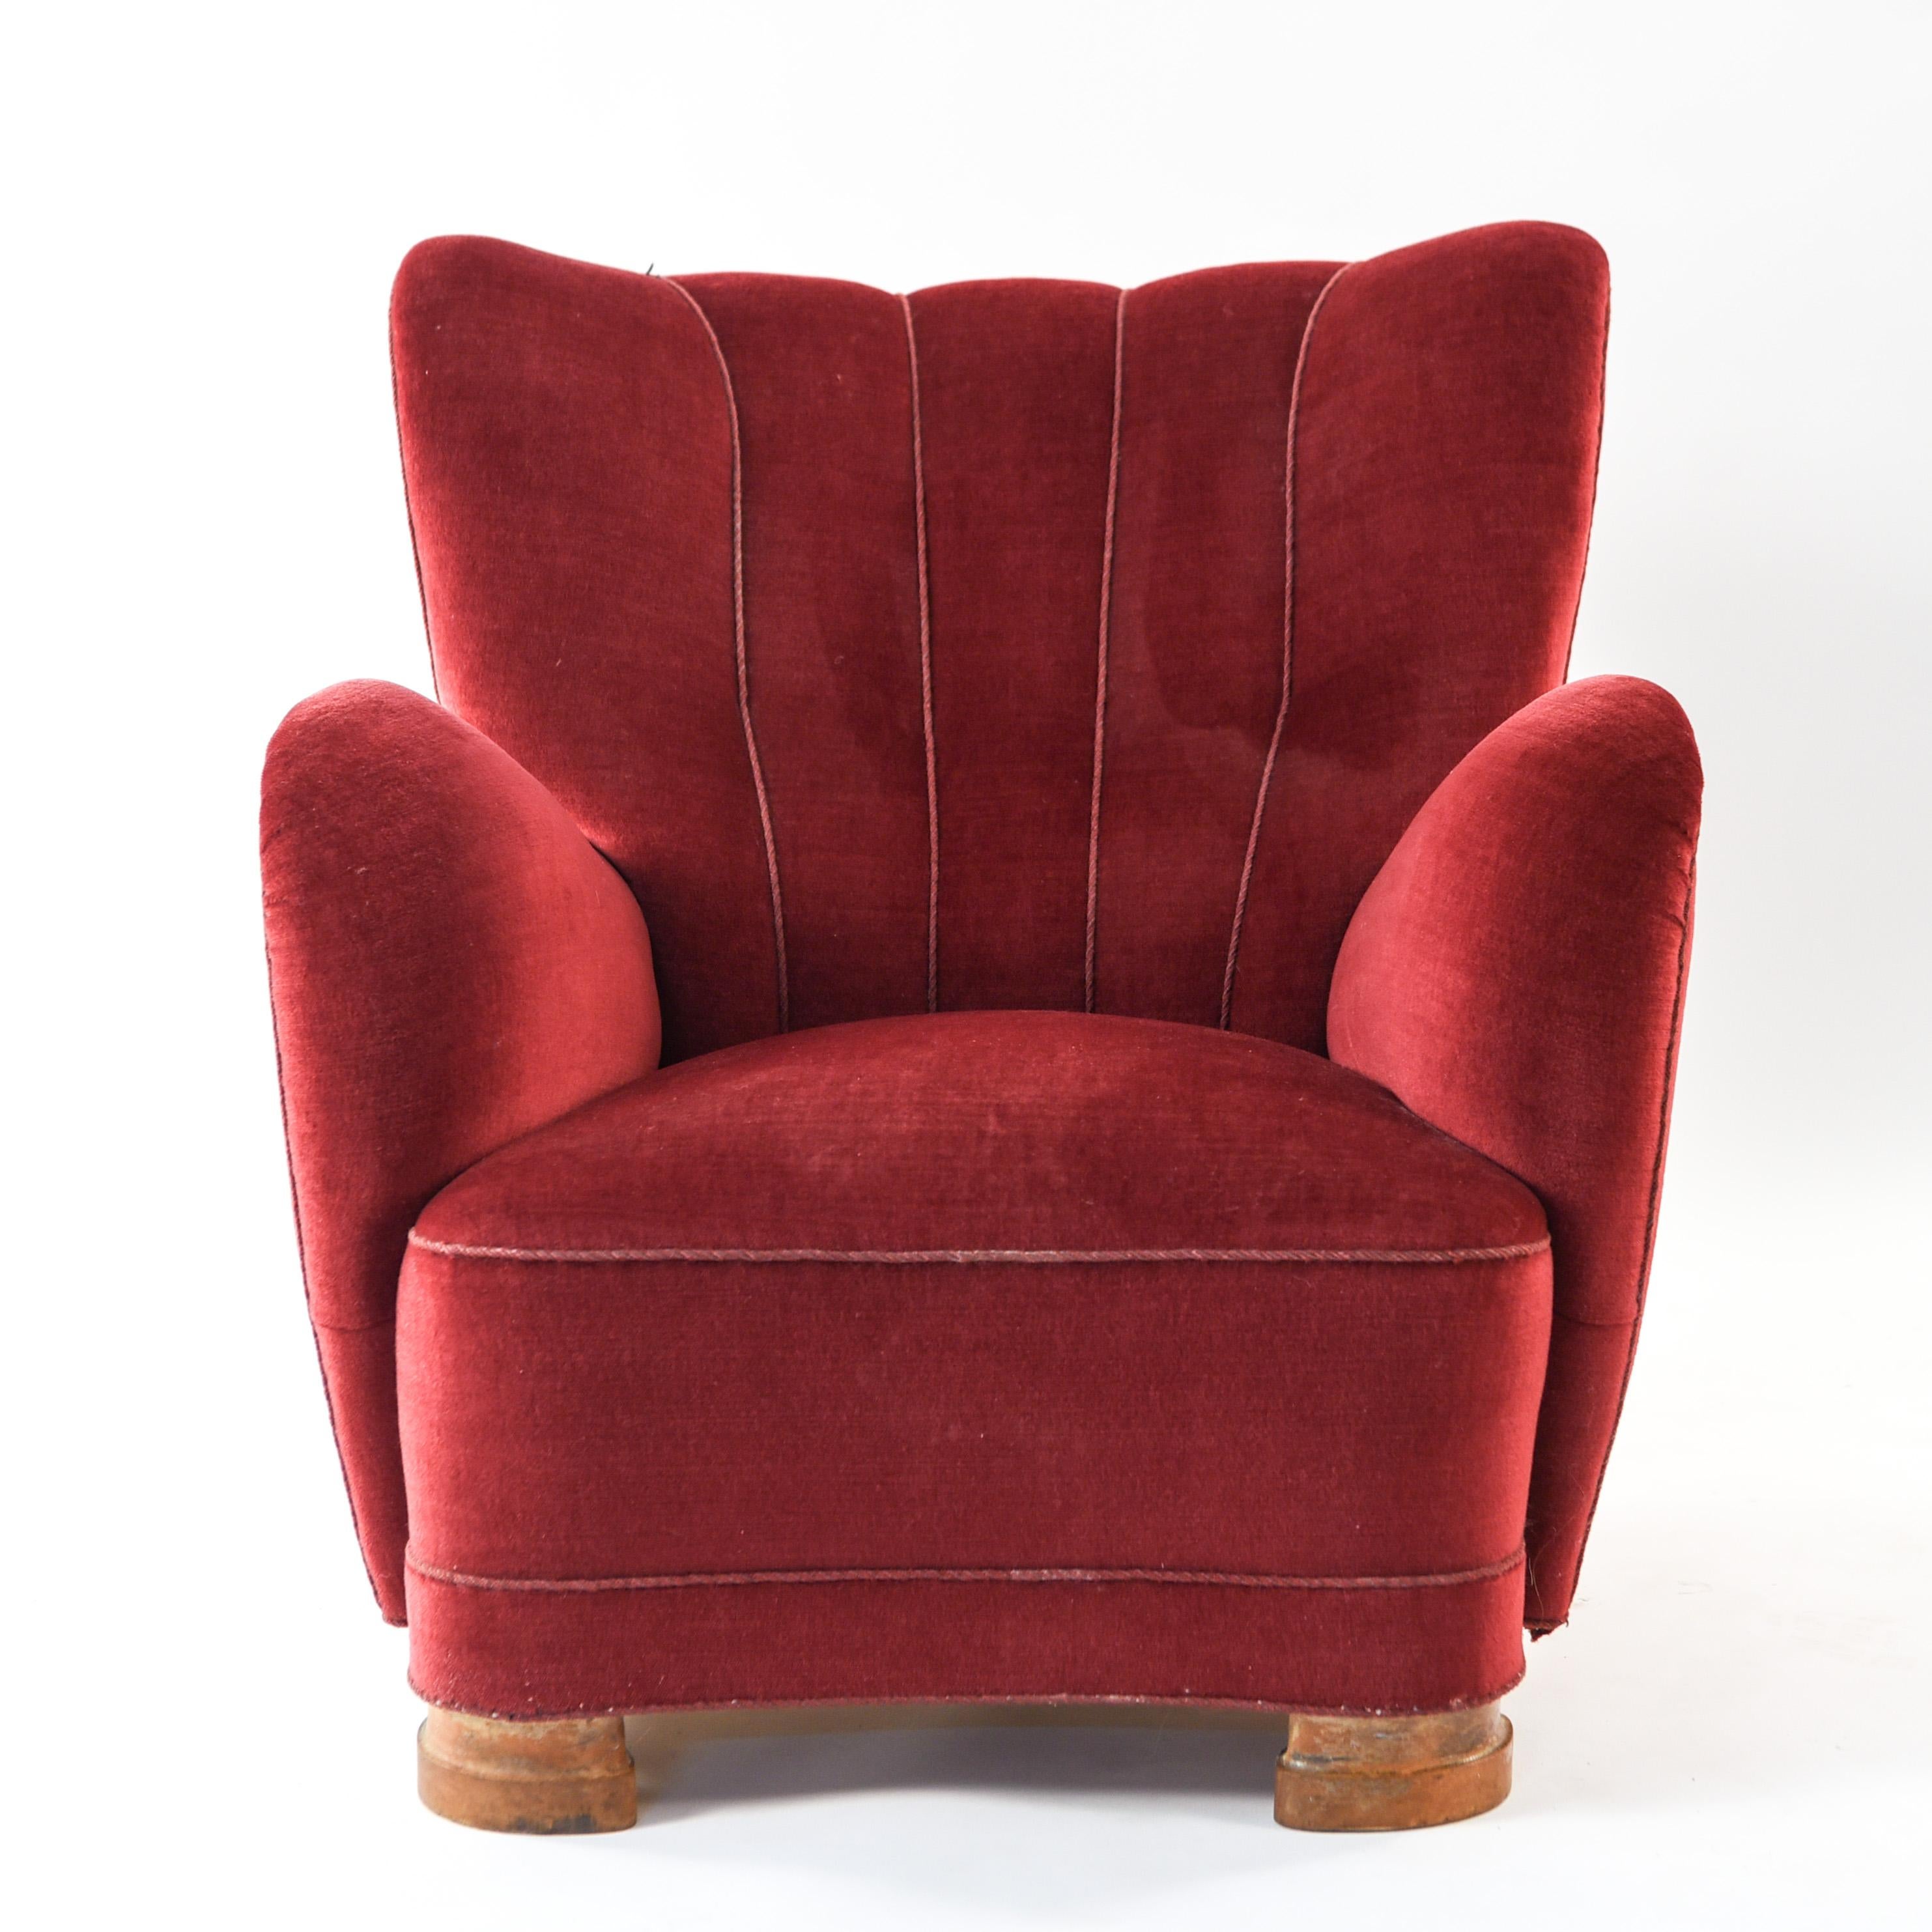 This Danish midcentury wingback lounge chair is in the manner of Flemming Lassen. This chair is upholstered in a pinkish mohair and features a scalloped back detail.